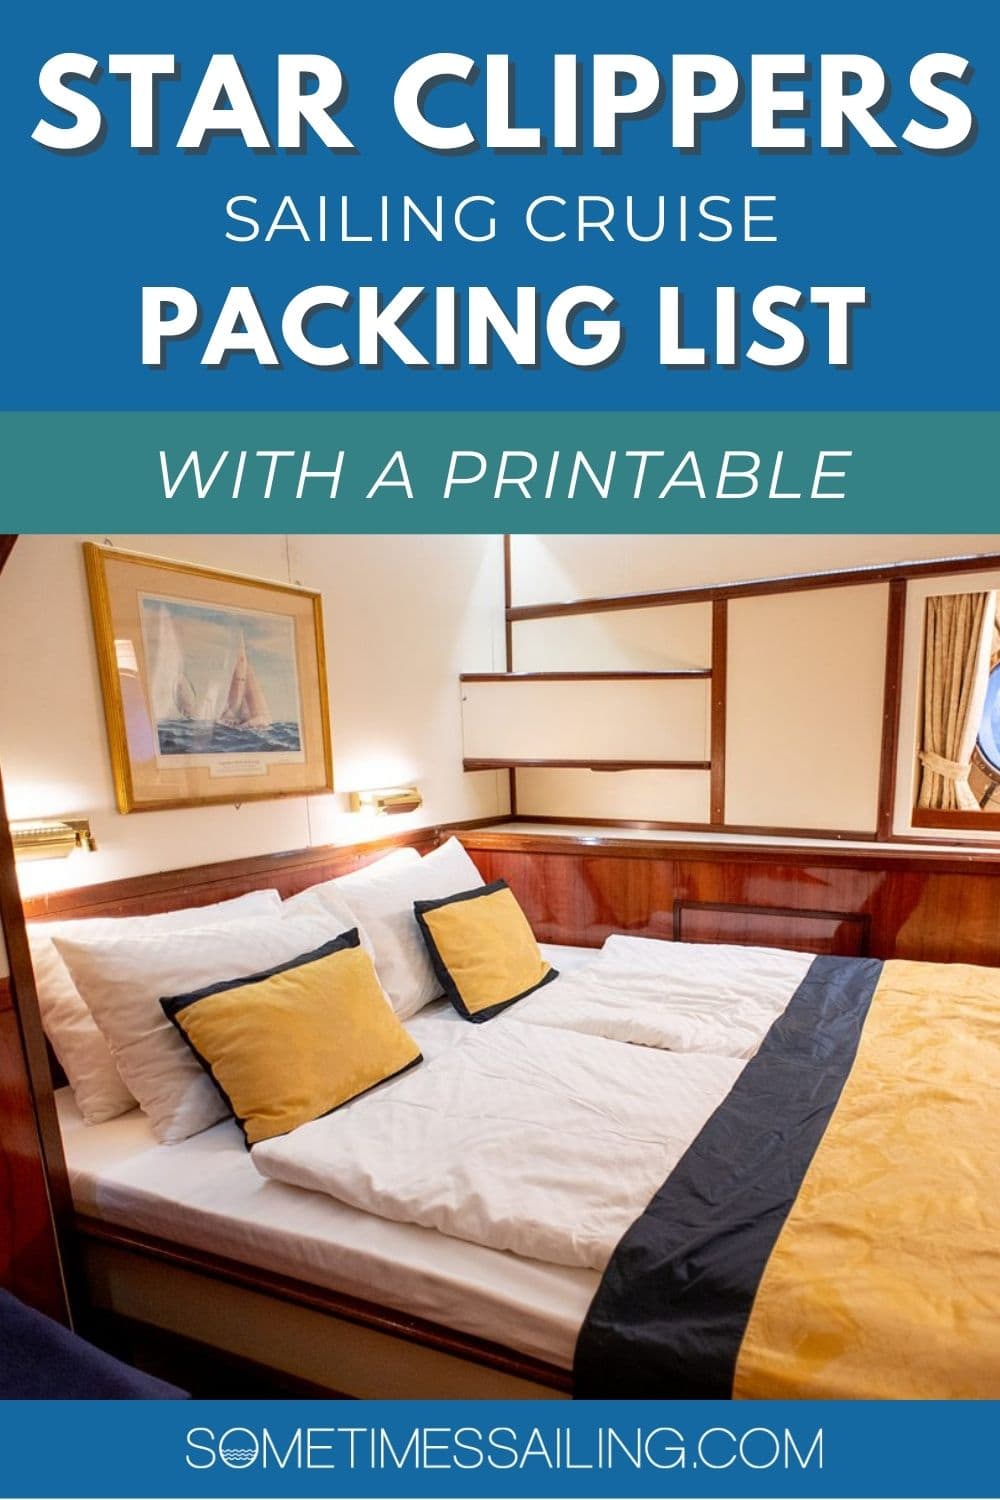 Star Clippers sailing cruise packing list with a printable, with a photo of a cabin on the ship. 